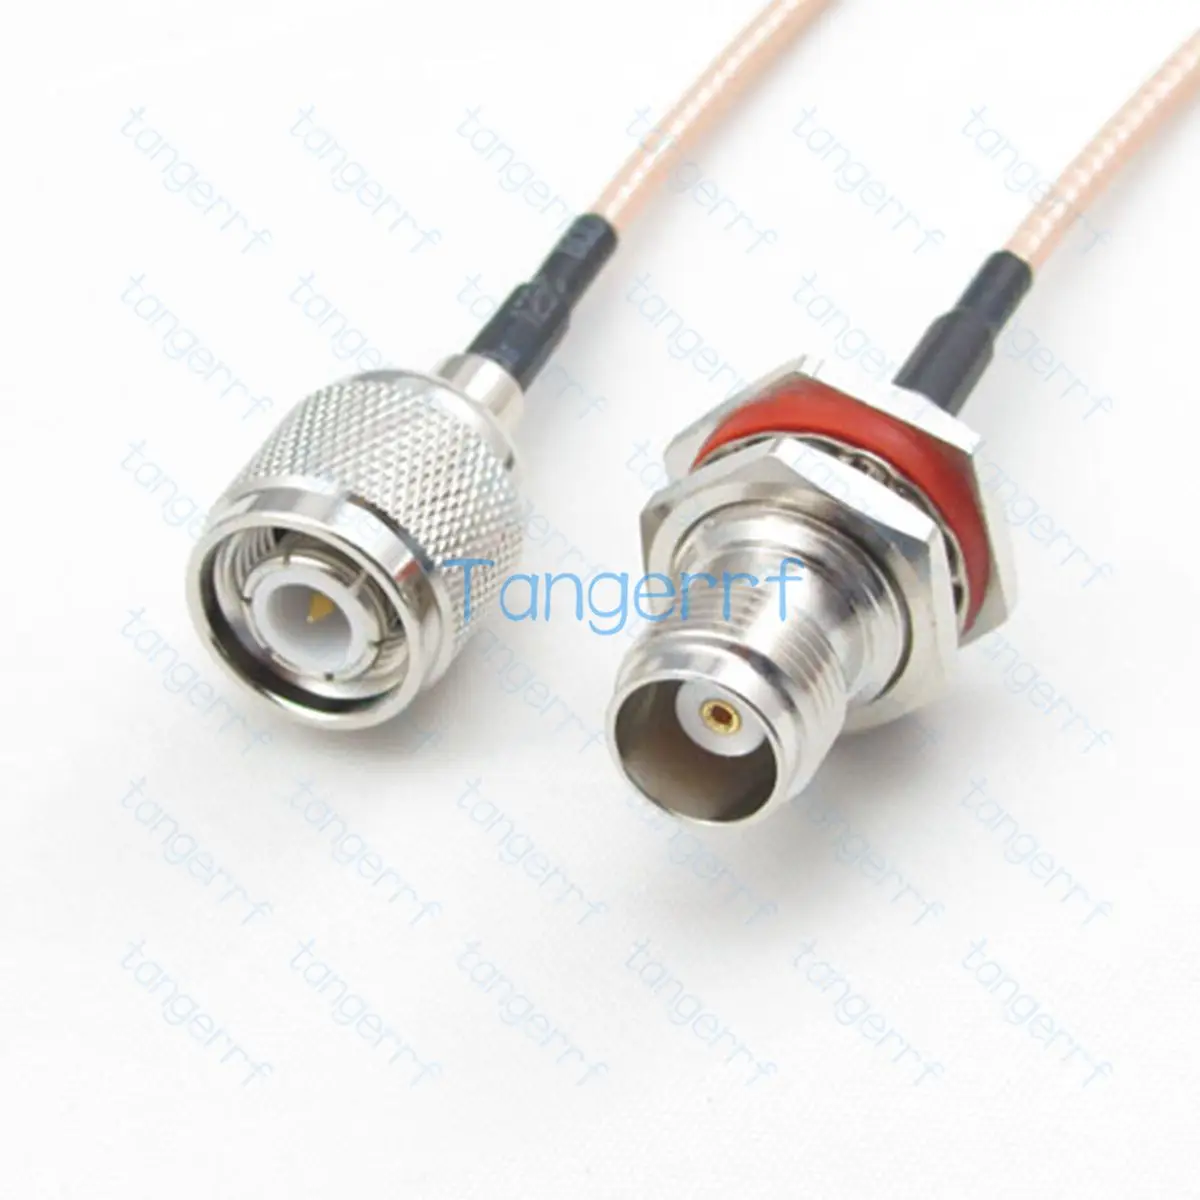 Купи TNC Male to TNC Female Cable RG316 Kable Pigtail Cable WiFi Any Long Lot Straight Connector Jumper Cable high quality Tanger за 279 рублей в магазине AliExpress